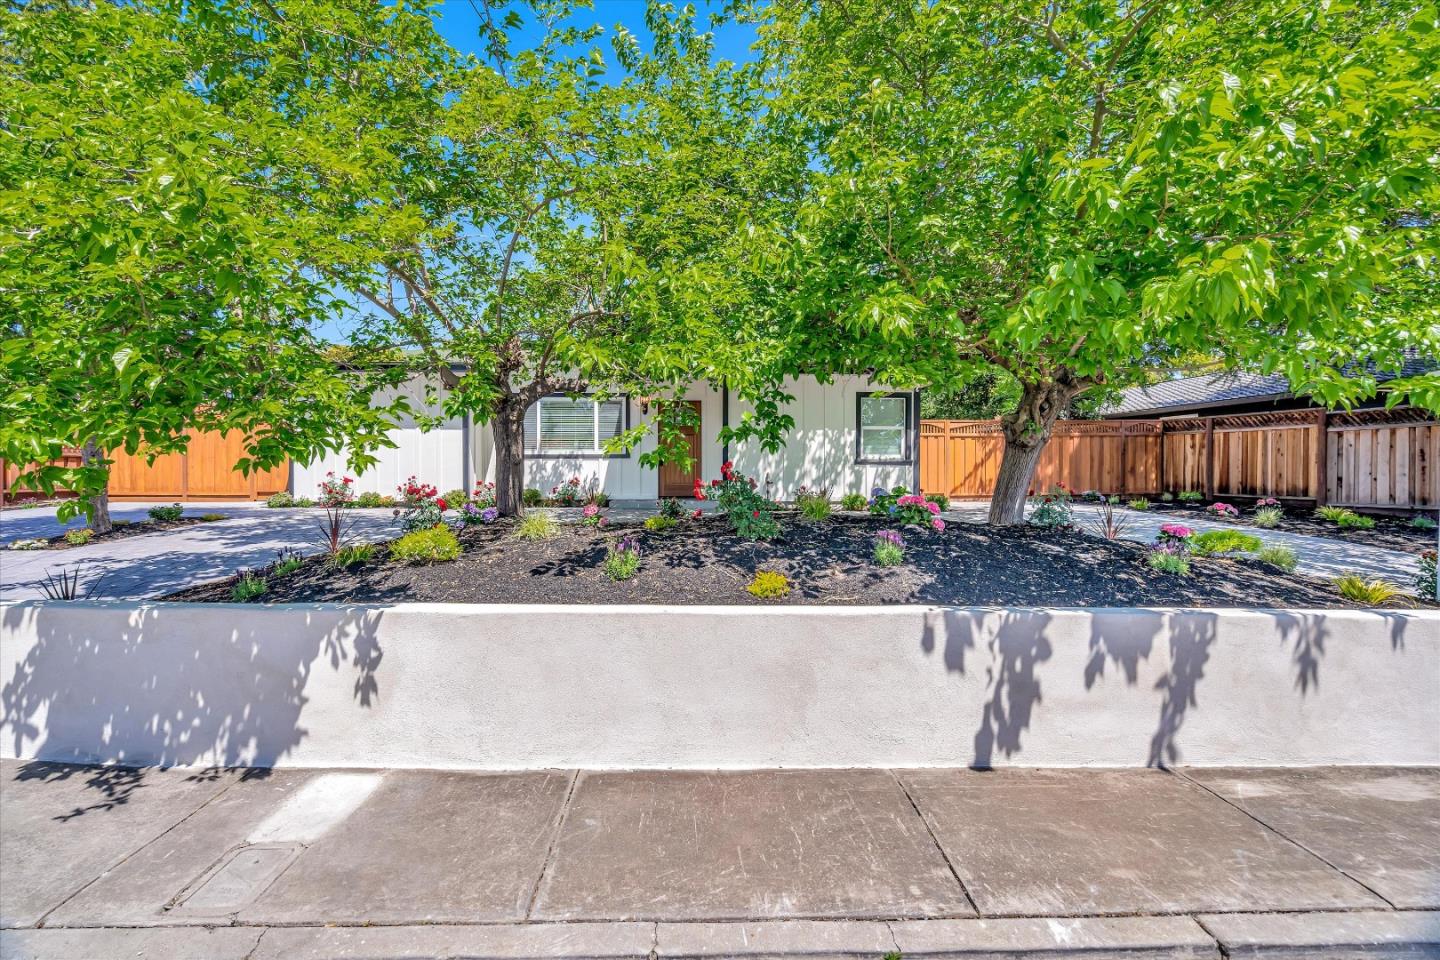 Photo of 10472 Mcvay Ave in San Jose, CA